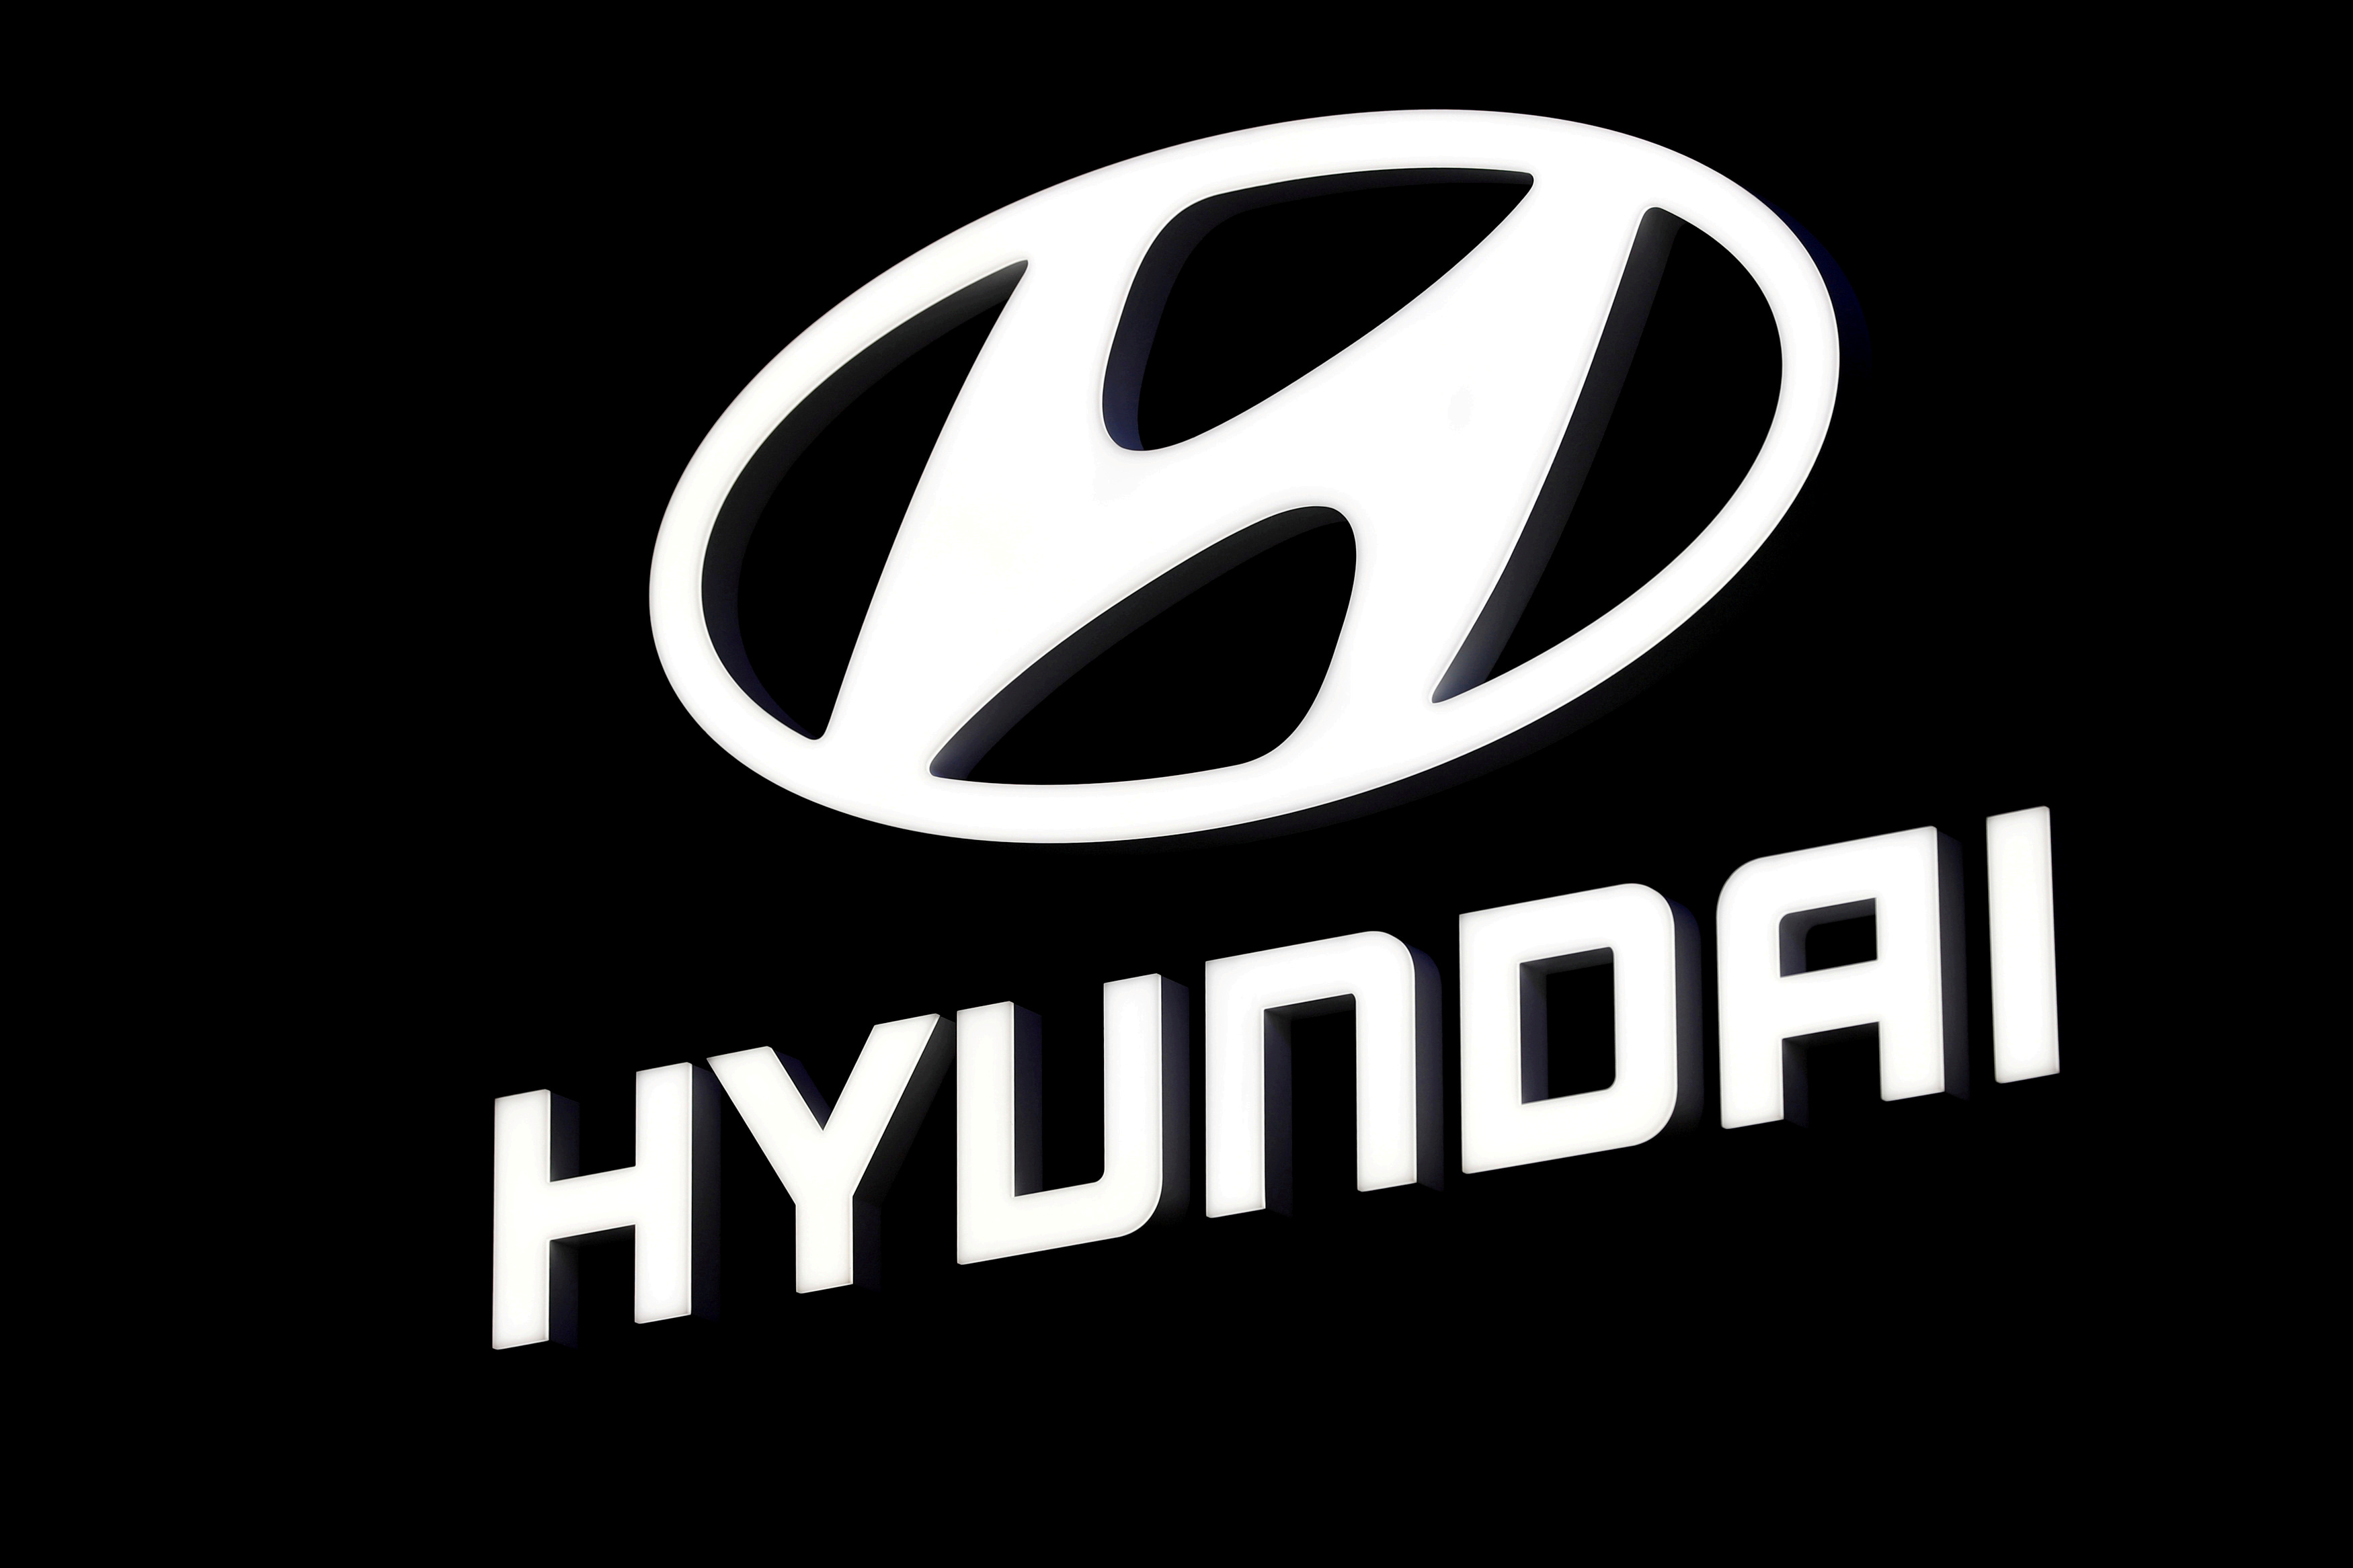 A Hyundai booth displays the company logo at the North American International Auto Show in Detroit, Michigan, U.S. January 16, 2018.  REUTERS/Jonathan Ernst